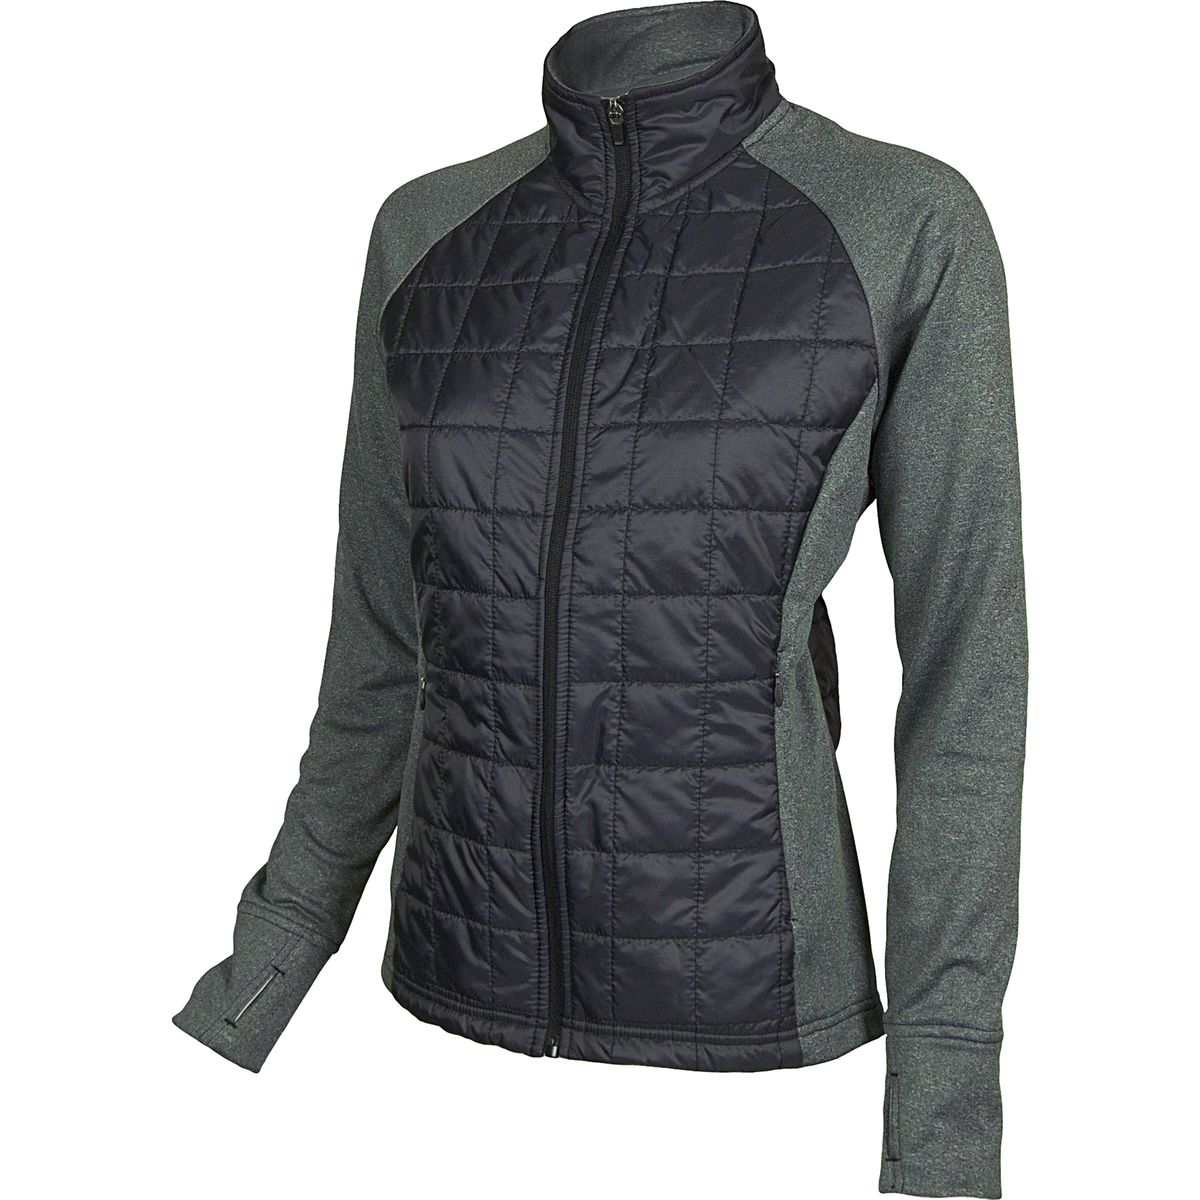 Club Ride Apparel Two Timer Jacket - Women's